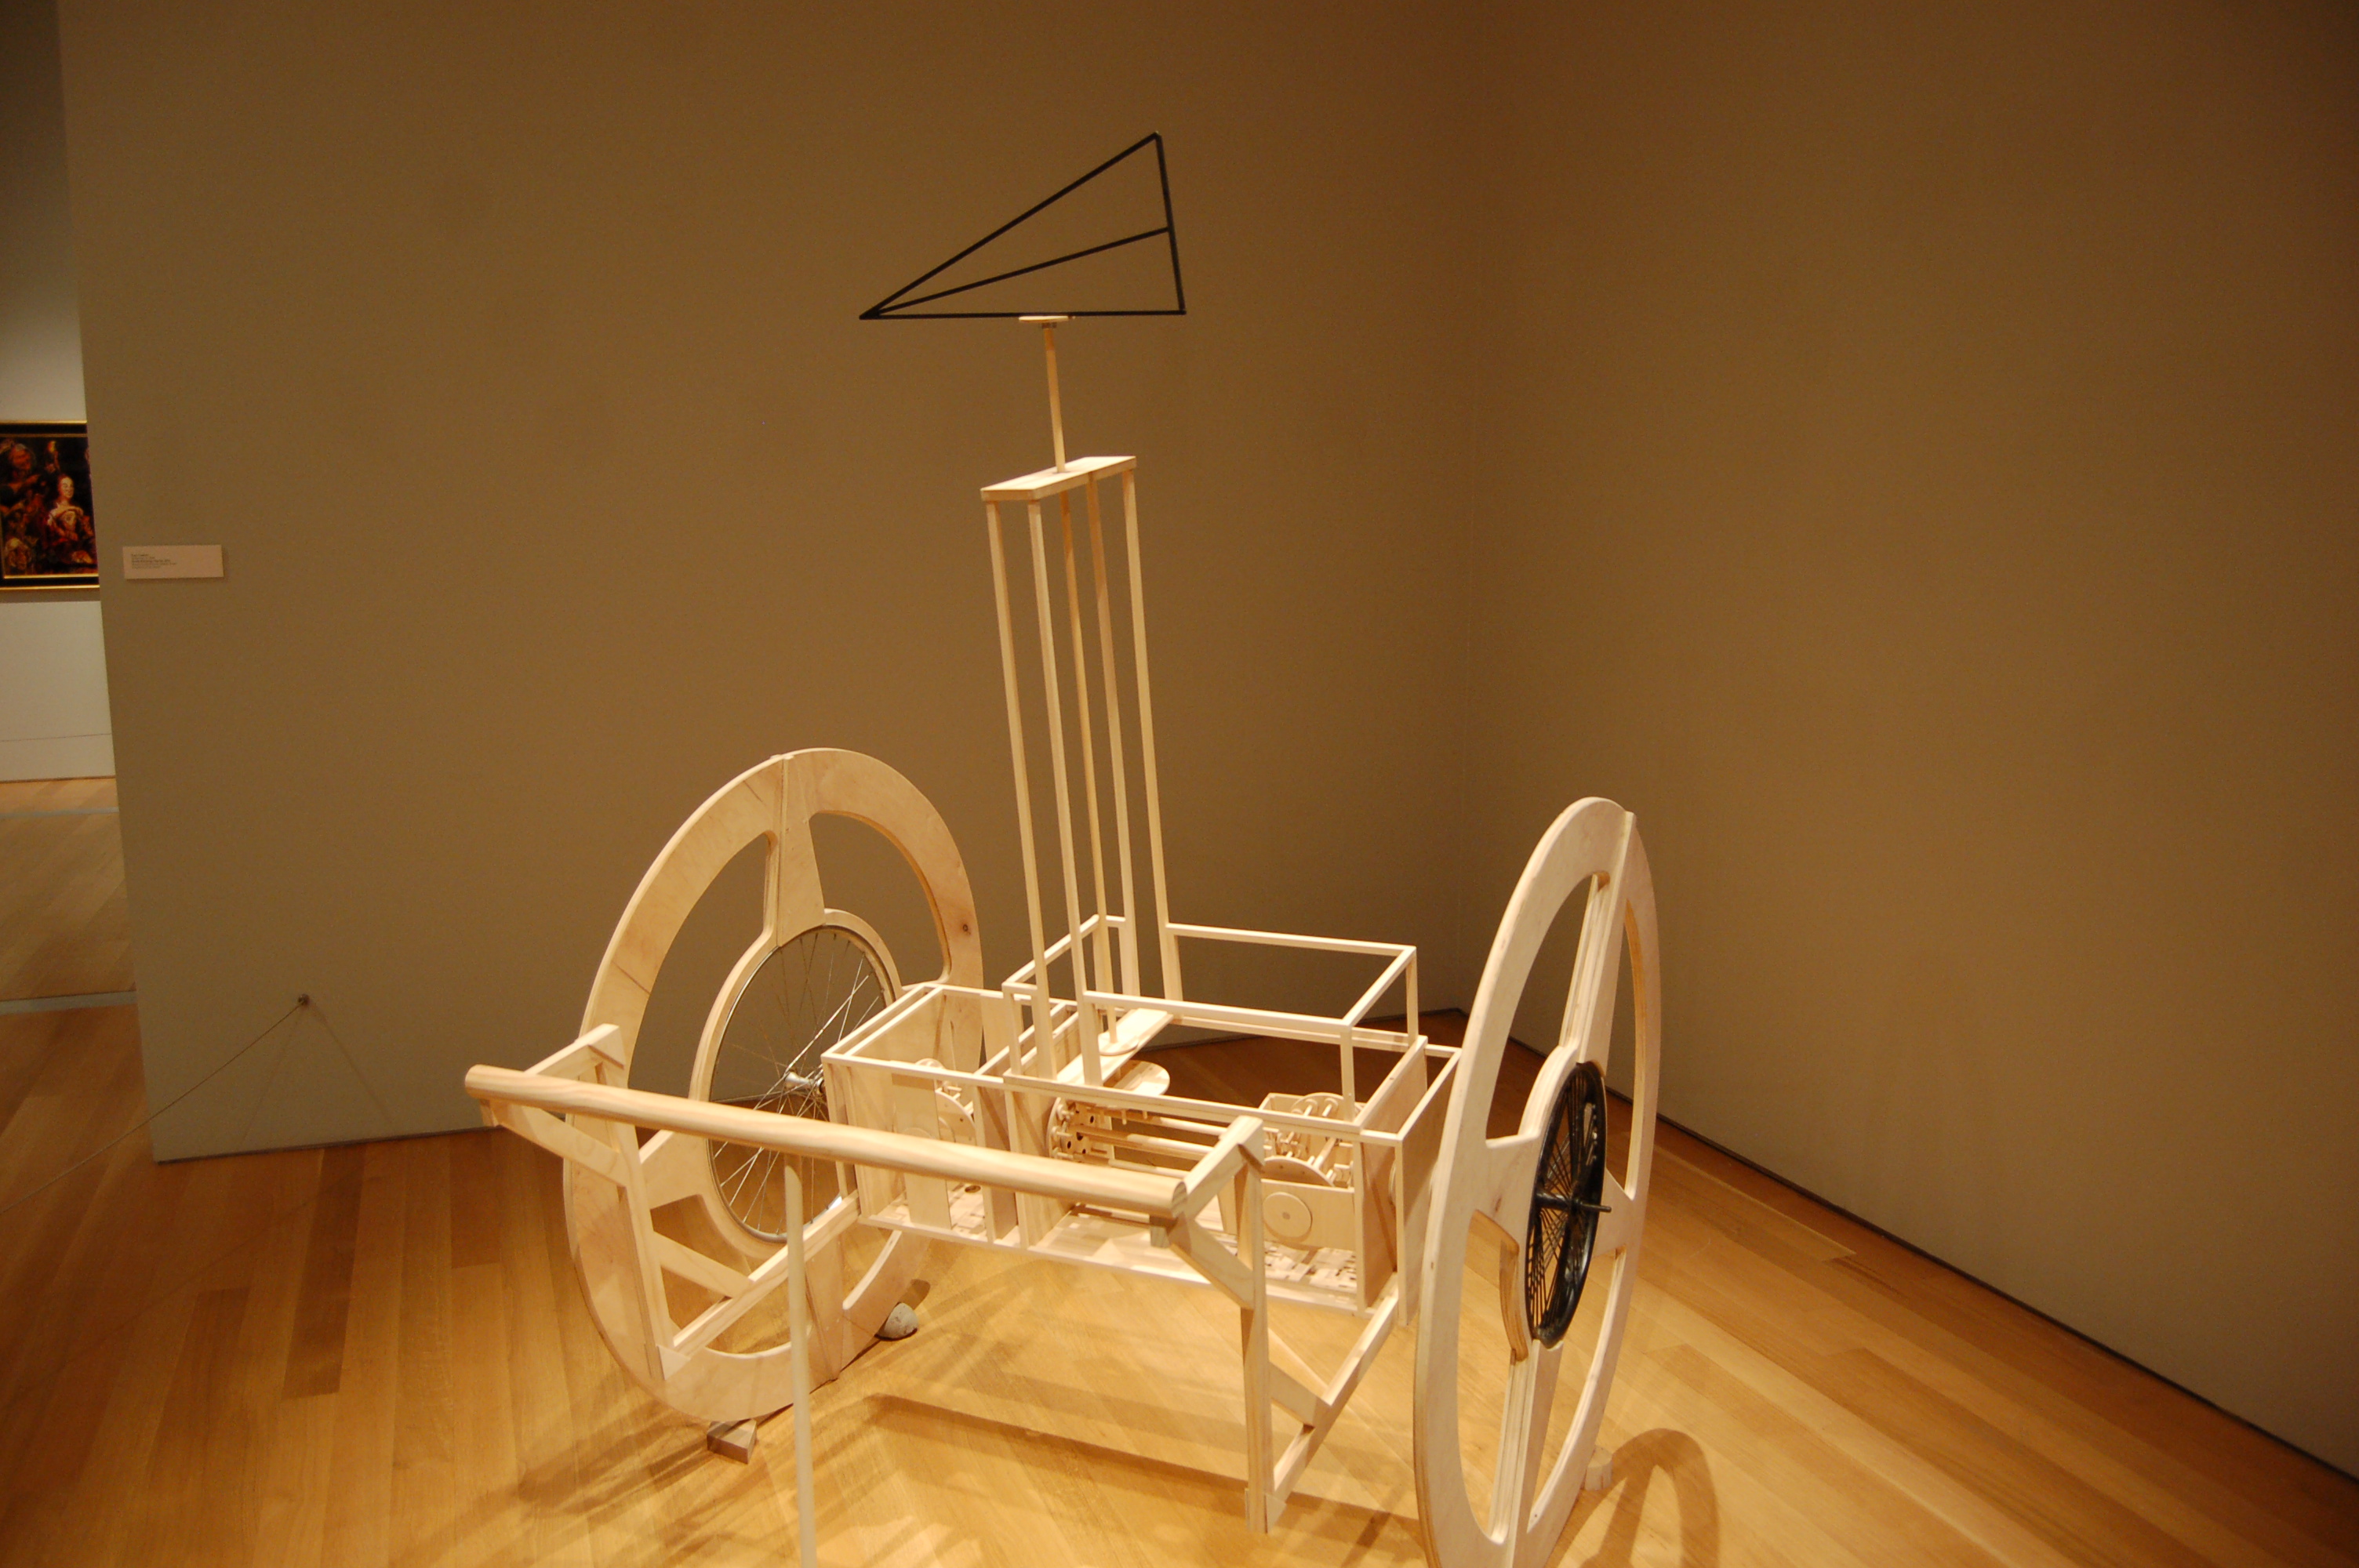 South Pointing Chariot by Kate Conlon